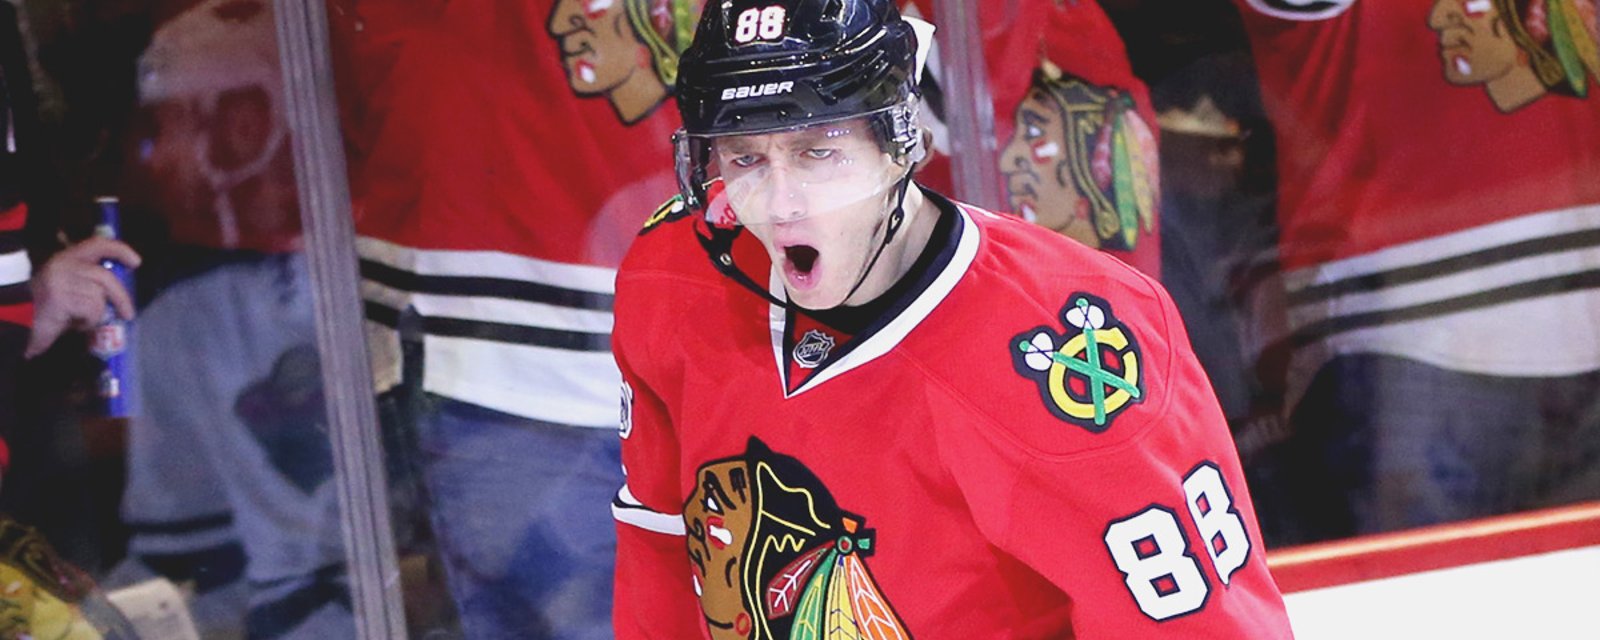 RUMOR: Patrick Kane expected to make public announcement soon?